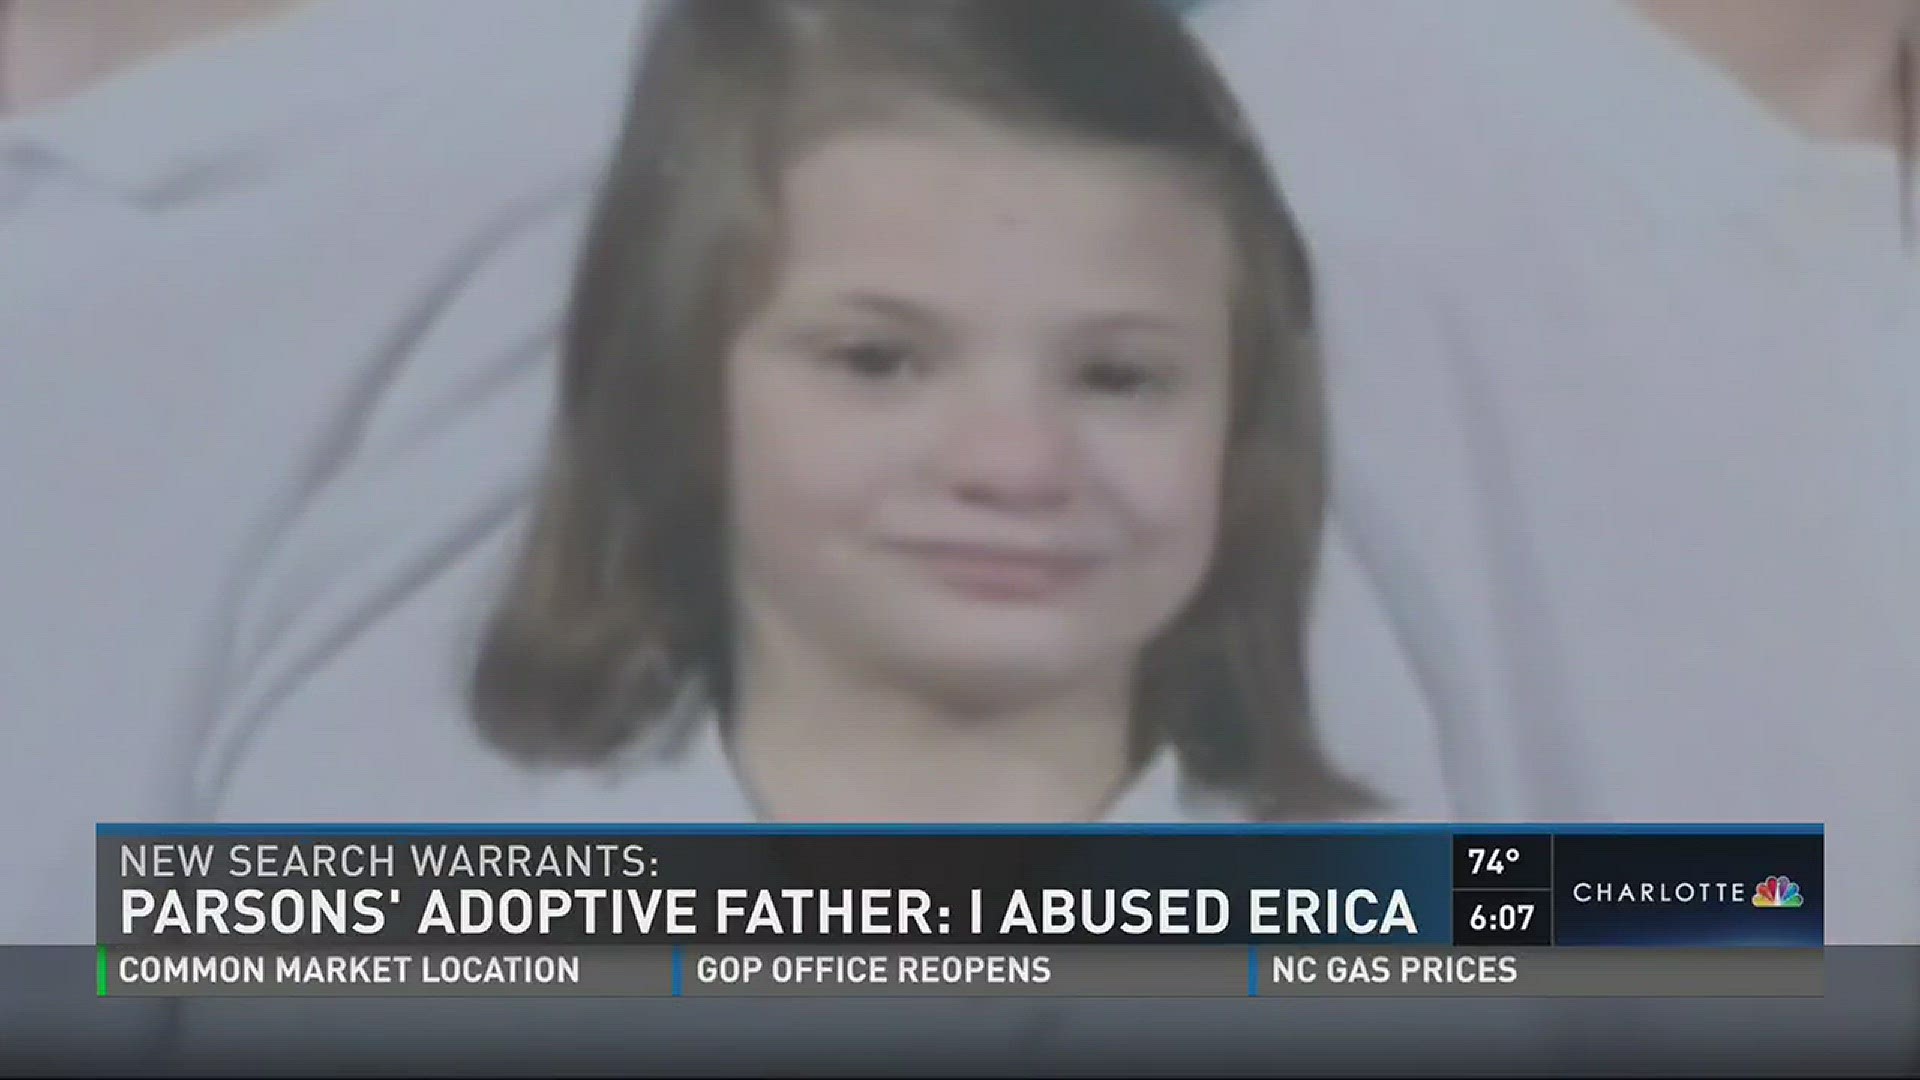 Sandy Parsons, the adoptive father of Erica Parsons, admitted to investigators that he physically abused her before her death.